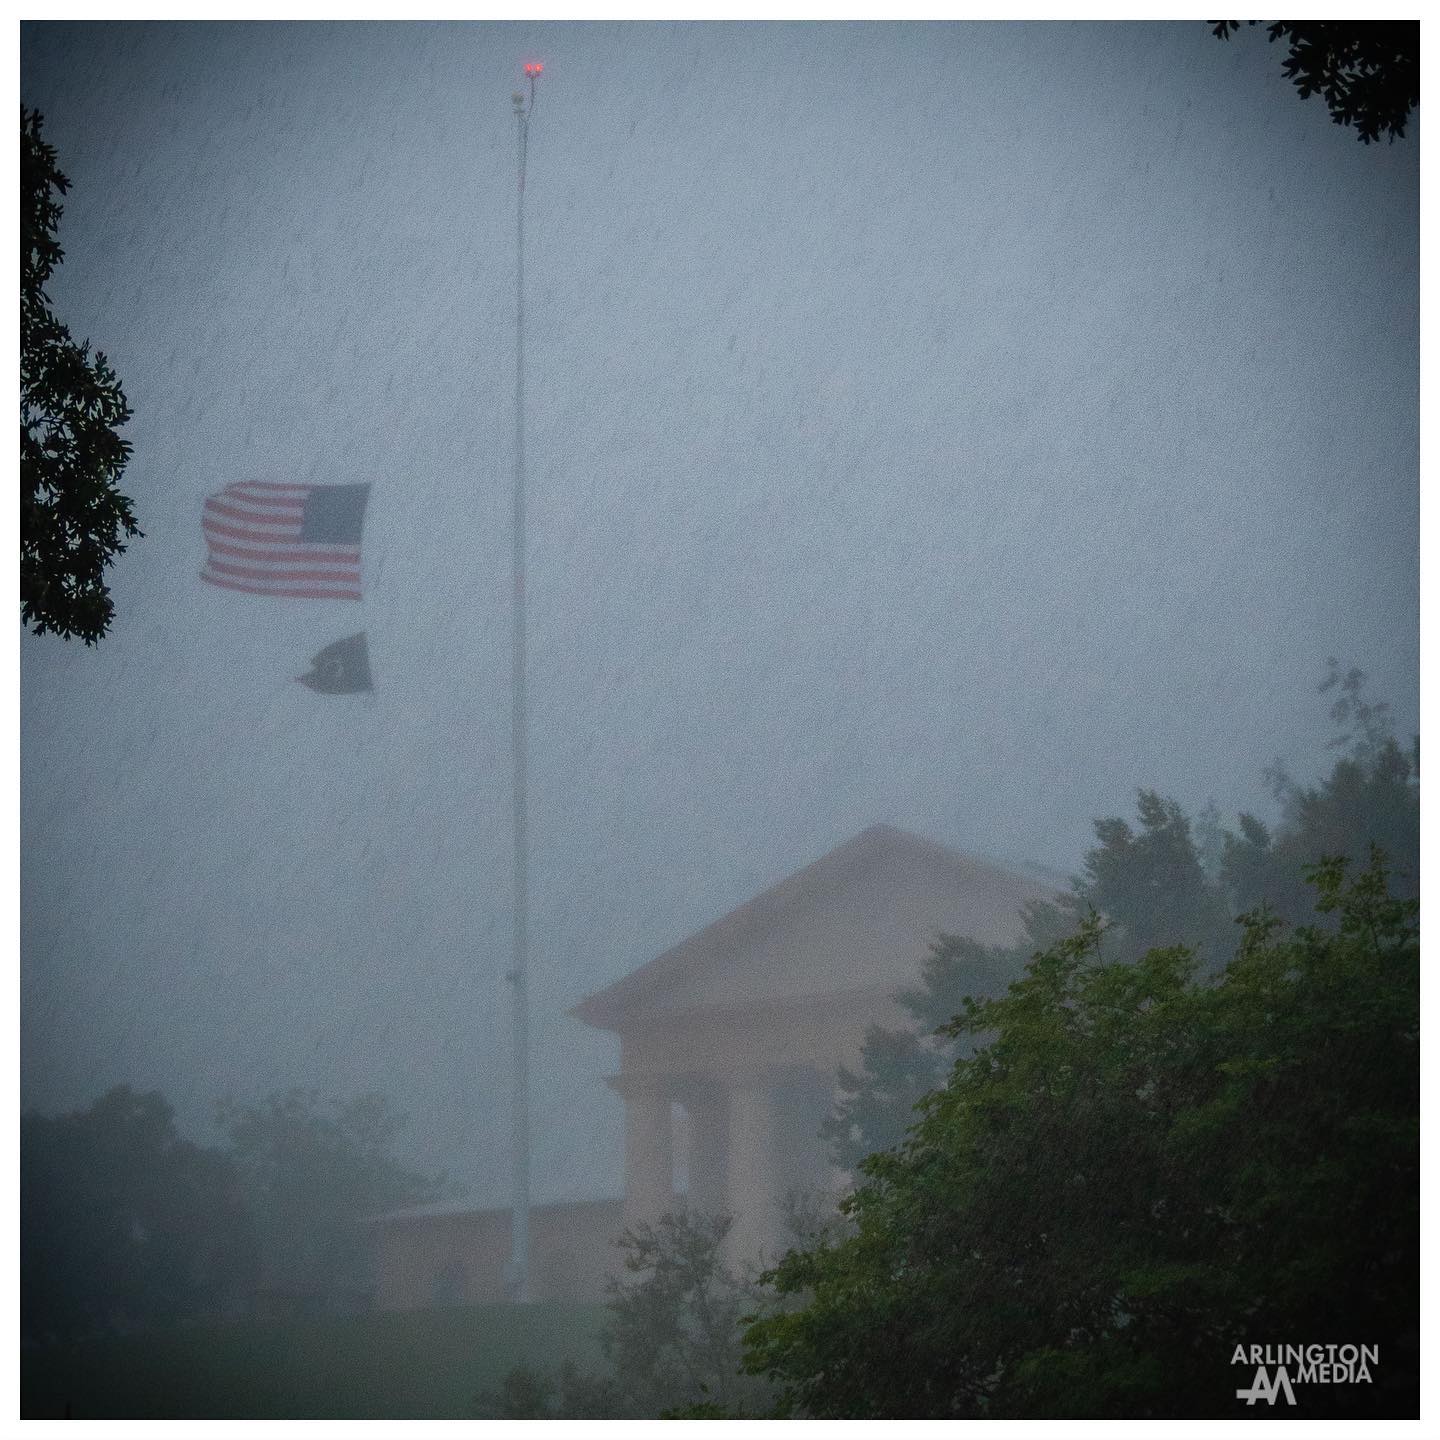 A severe line of thunderstorms with wind gust over 60 miles per hour moved through Arlington just after our forth and final service for the day, damaging some of our gear. It was humid, sunny and 95° five minutes before this photo was taken. 


#Arlington⠀
#ArlingtonMedia⠀
#ArlingtonCemetery⠀
#ArlingtonNationalCemetery⠀